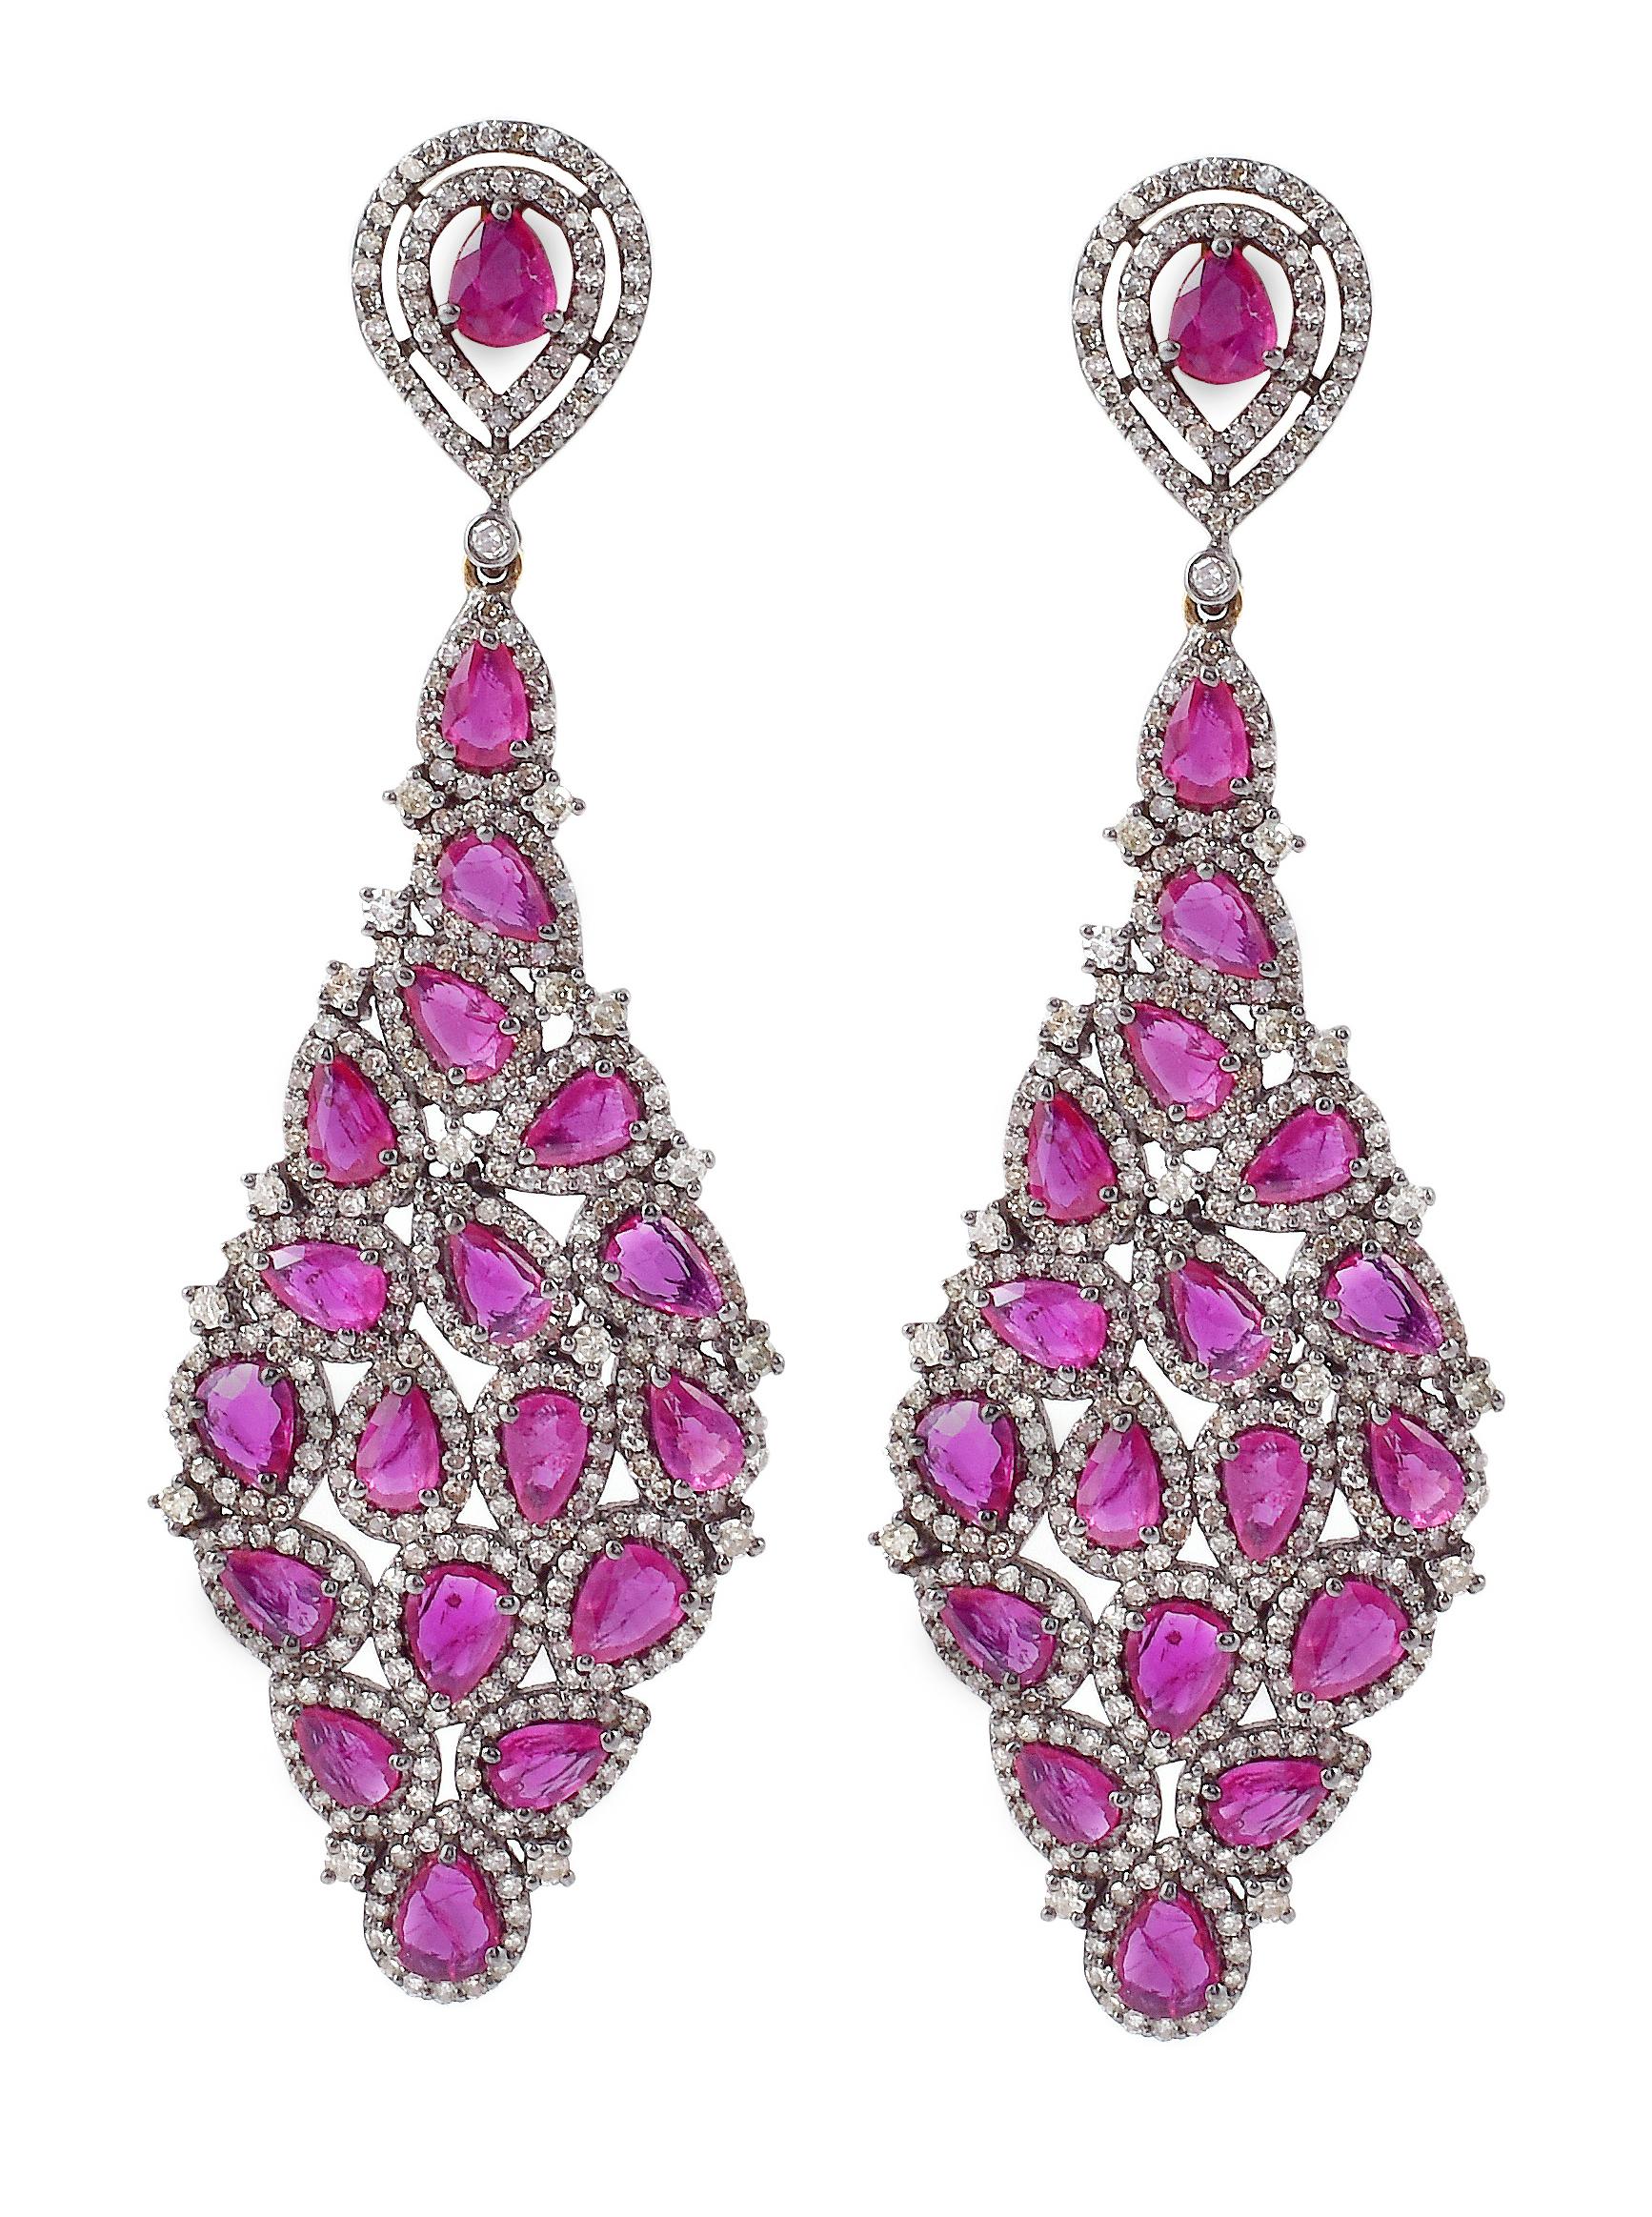 Pear Cut 11.47 Carat Diamond and Ruby Drop Earrings in Contemporary Victorian Style For Sale